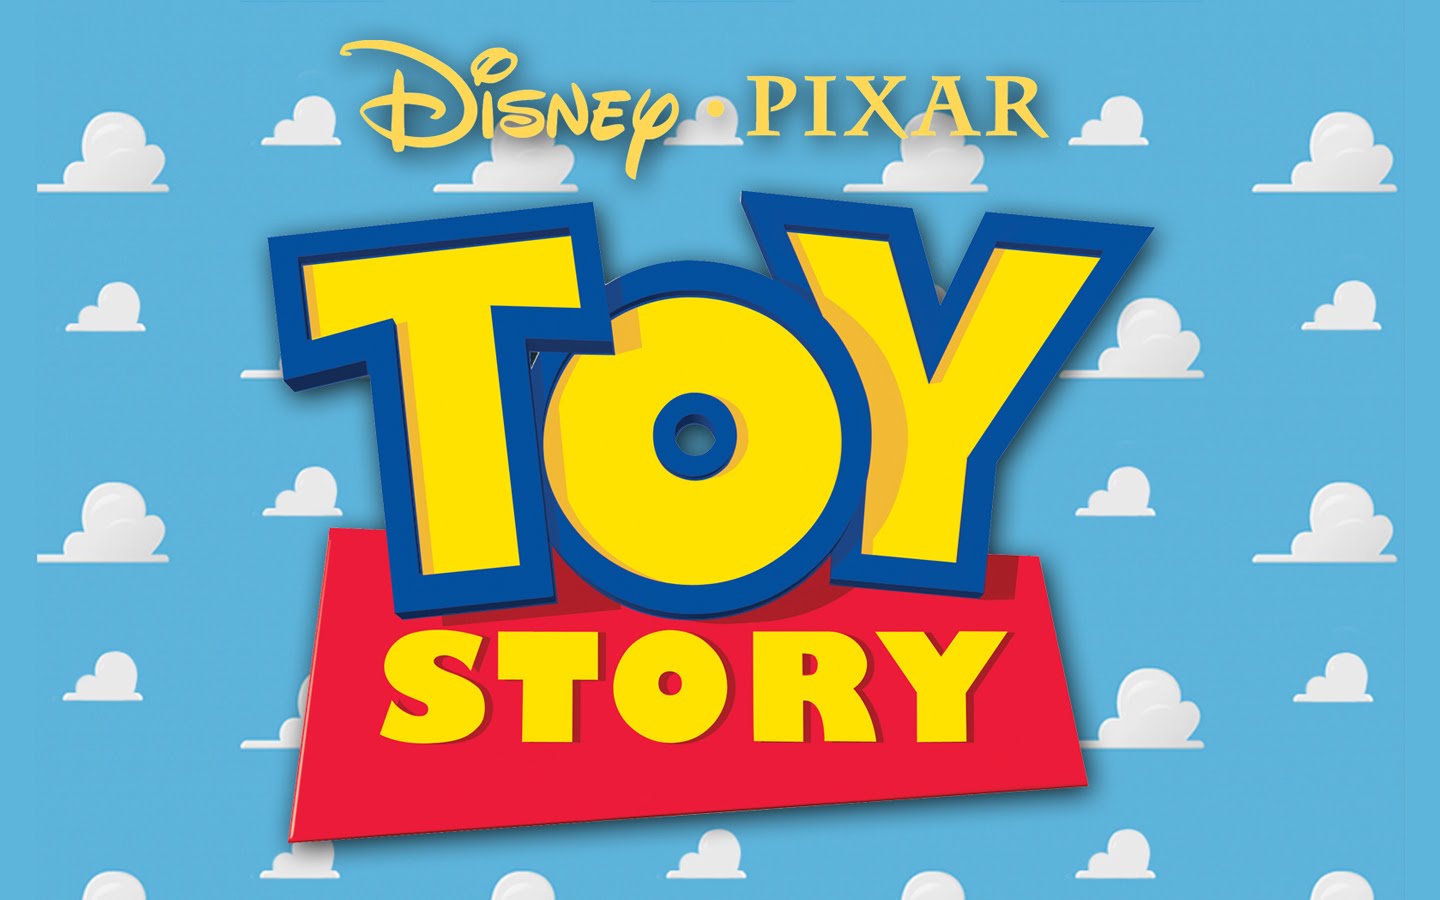 Toy Story Wallpaper